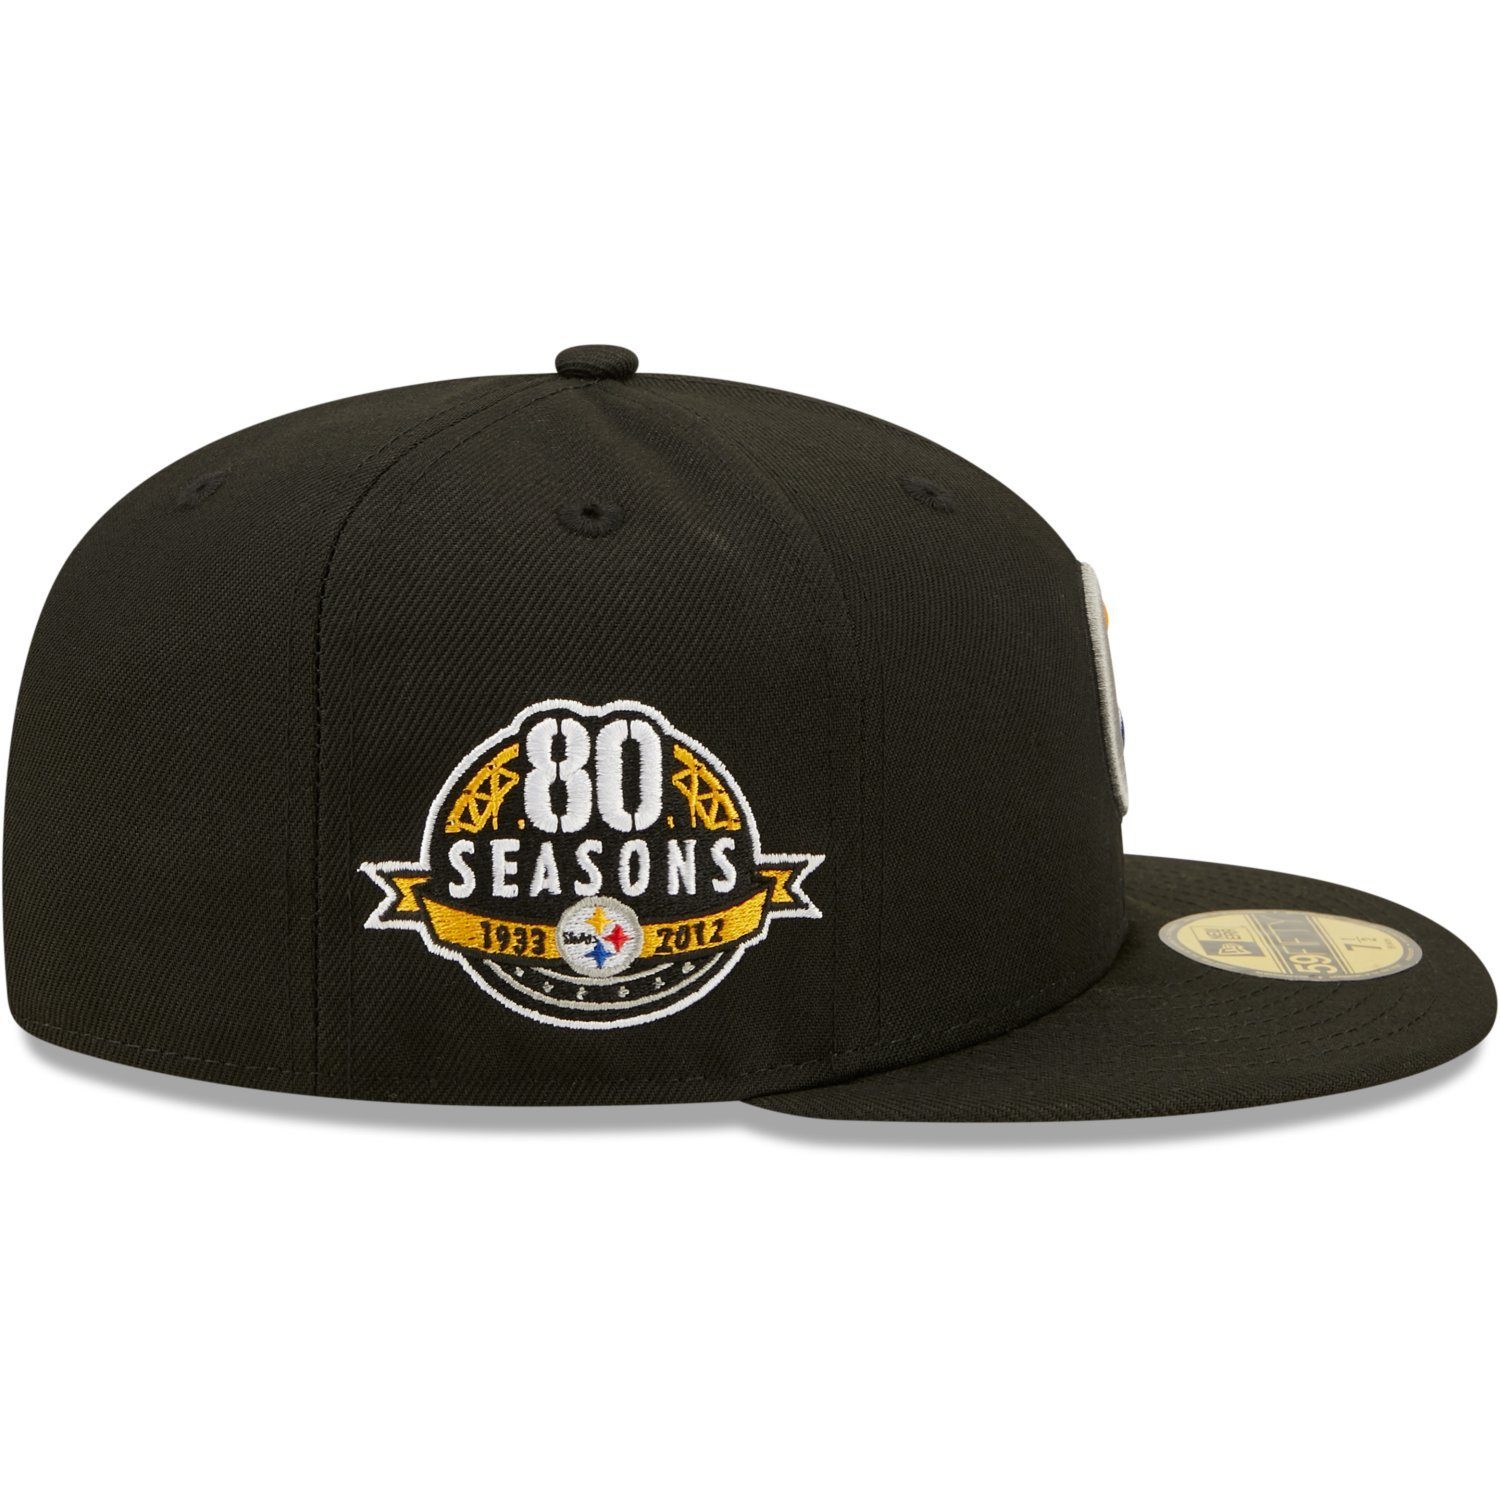 New Era Fitted 80 Pittsburgh Steelers 59Fifty Cap Seasons